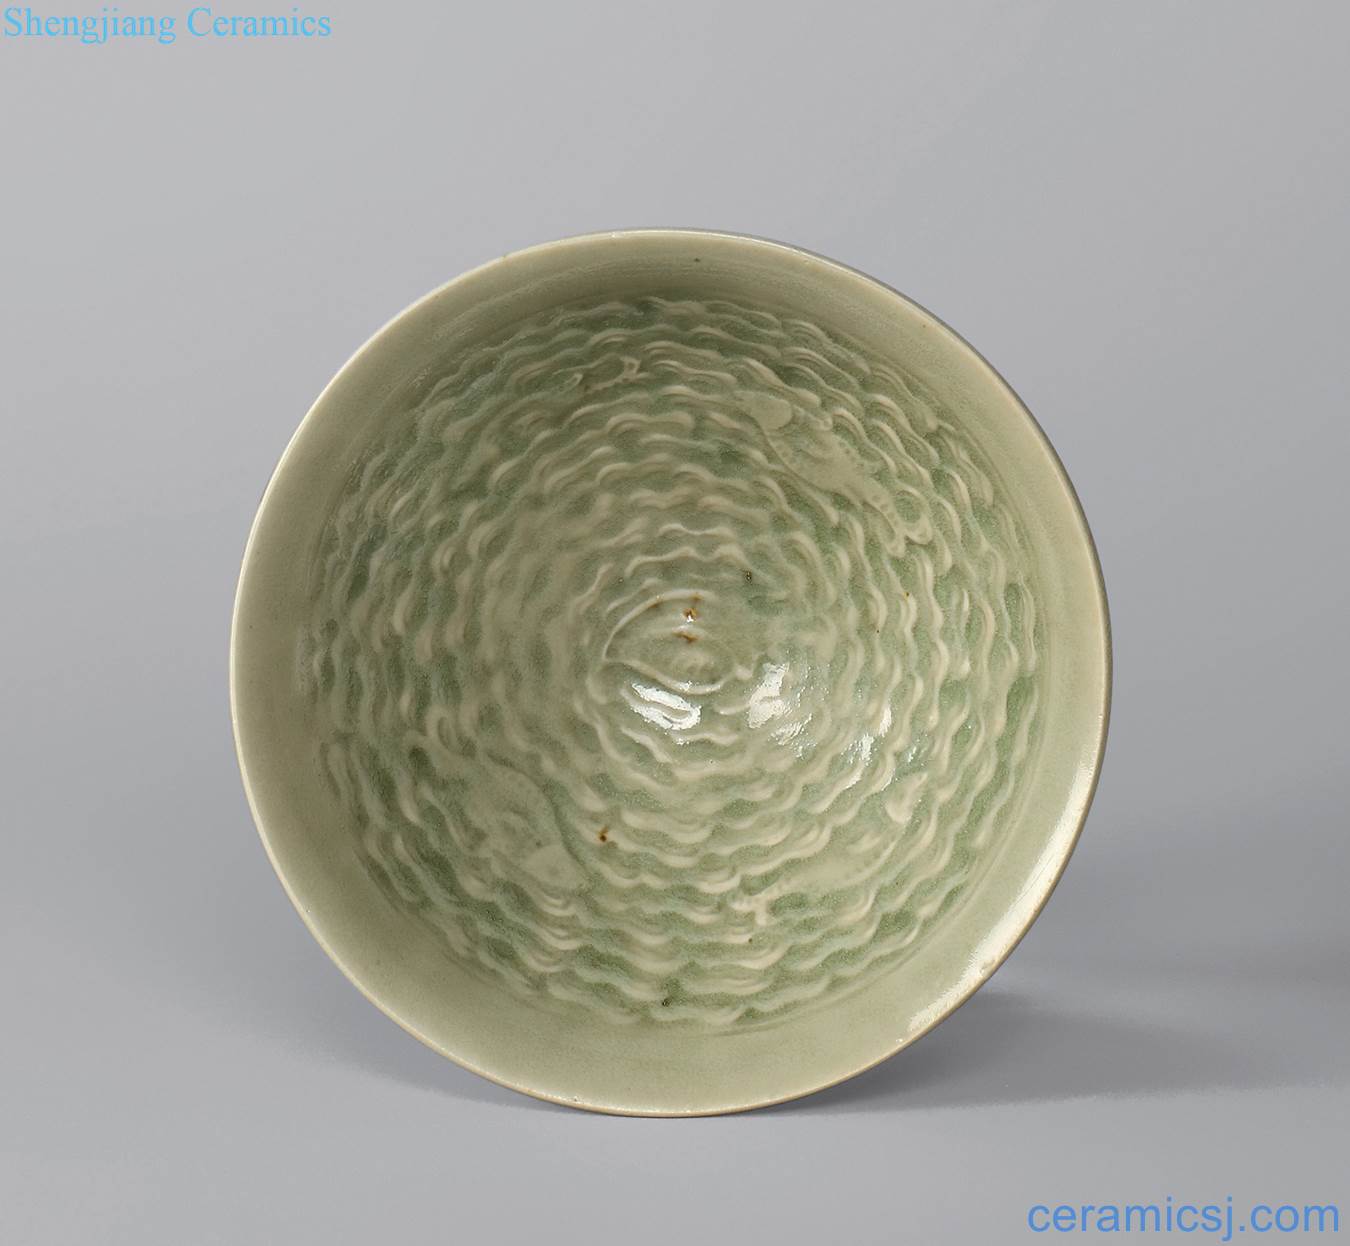 Northern song dynasty (960-1127) and gold (1115-1234), yao state kiln green glaze stamps water fish grain small bowl